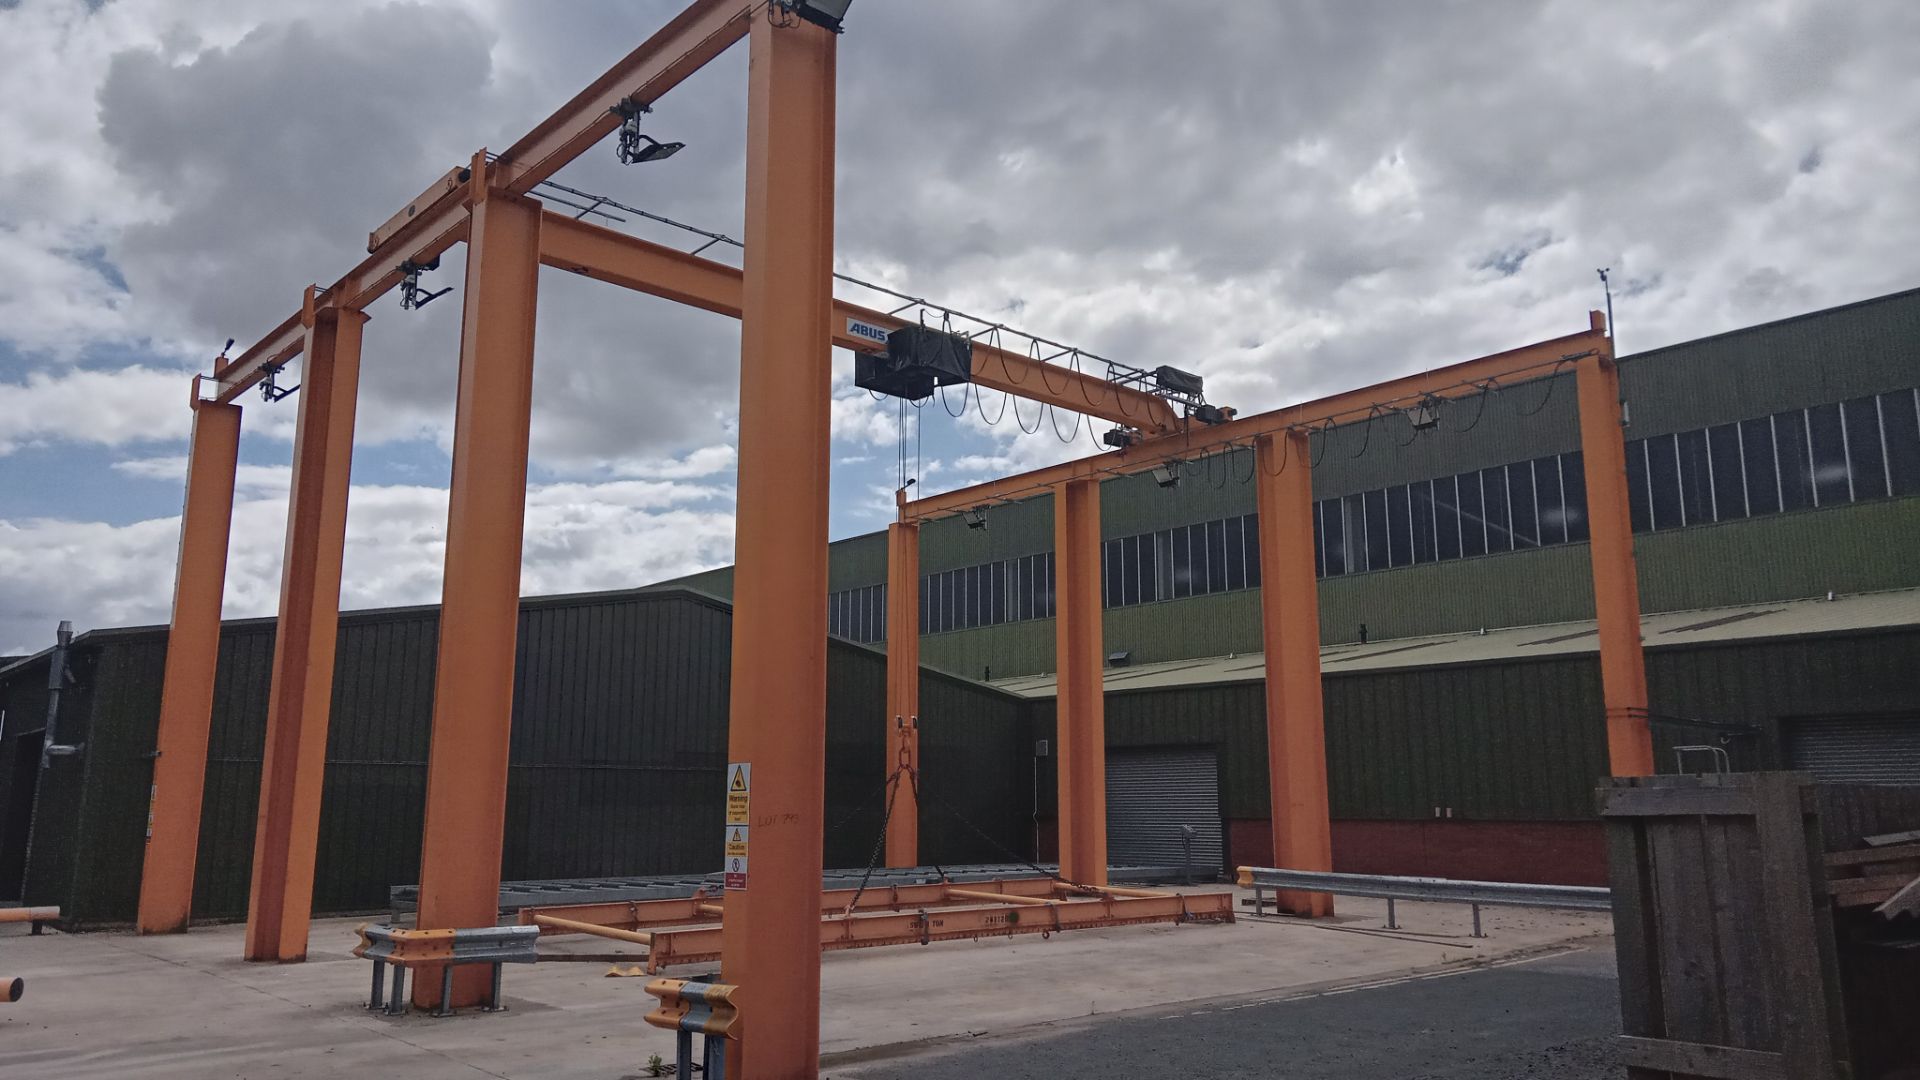 c.15m x 15m x10m High Gantry Fitted with Abus 8 Tonne Overhead Electric Travelling Crane and 4x2 Upr - Image 2 of 2